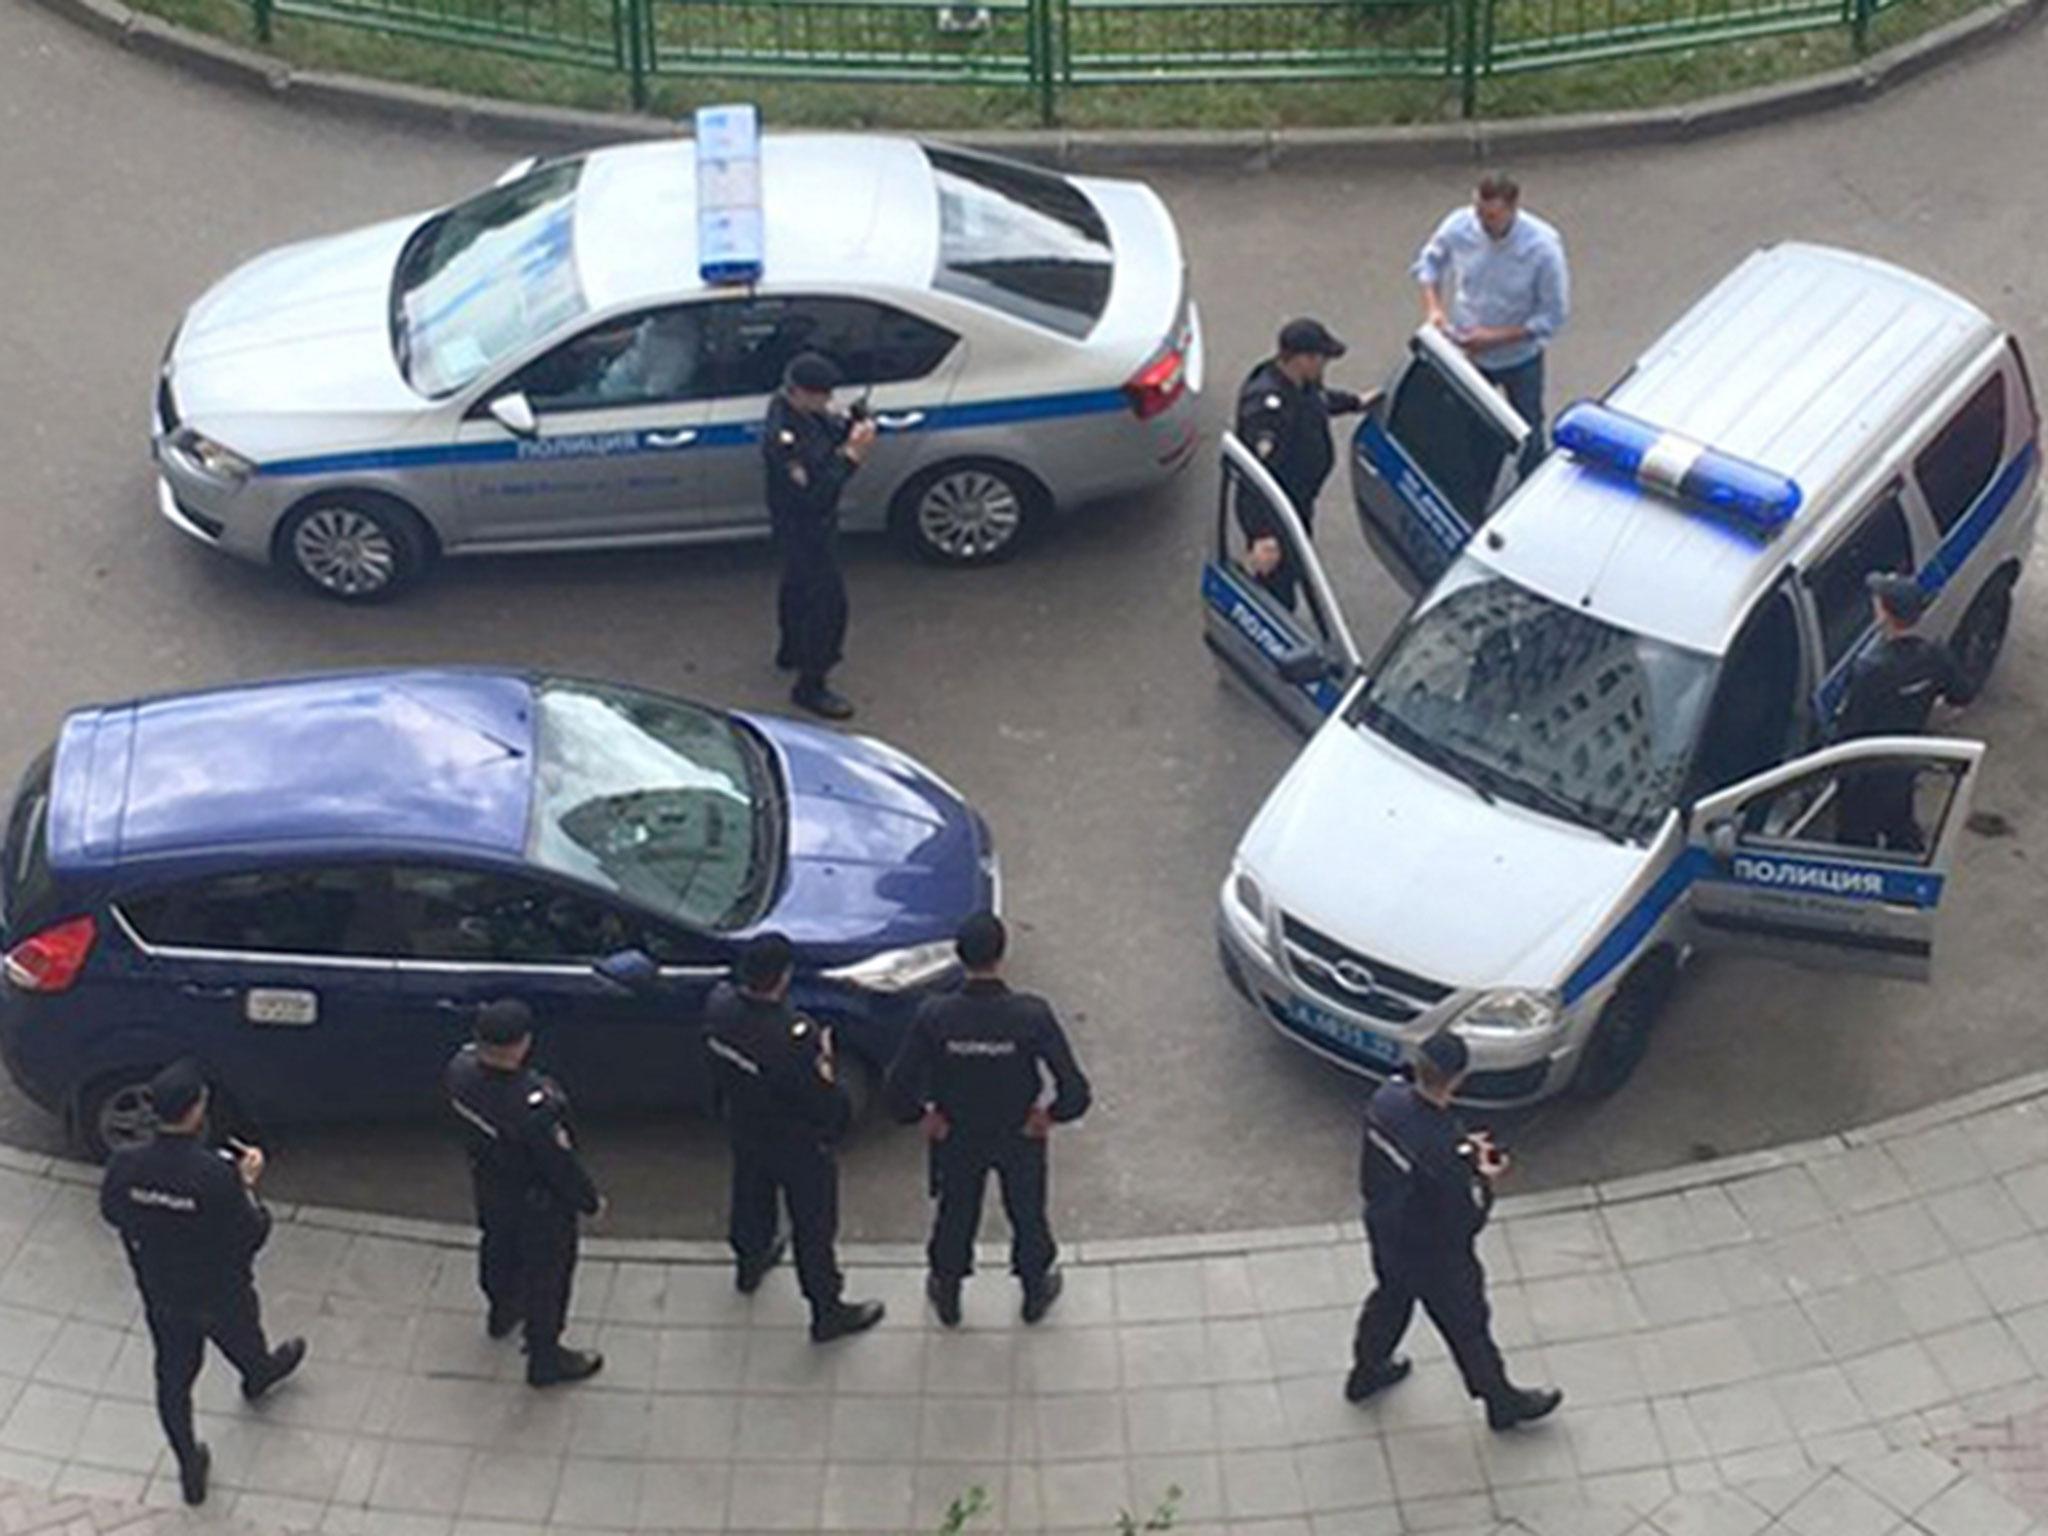 Alexei Navalny (dressed in a blue shirt) is detained by police outside his apartment in Moscow, Russia